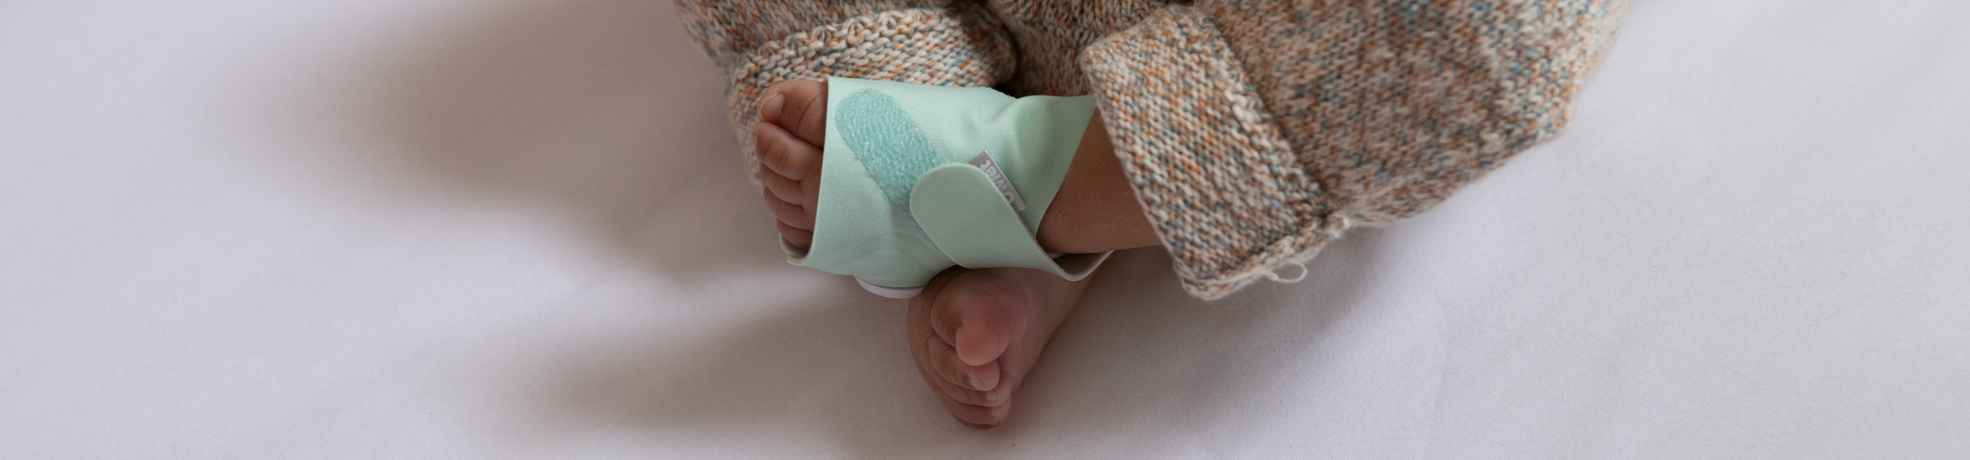 Owlet Smart Sock 3 in Mint Green peace of mind through every milestone